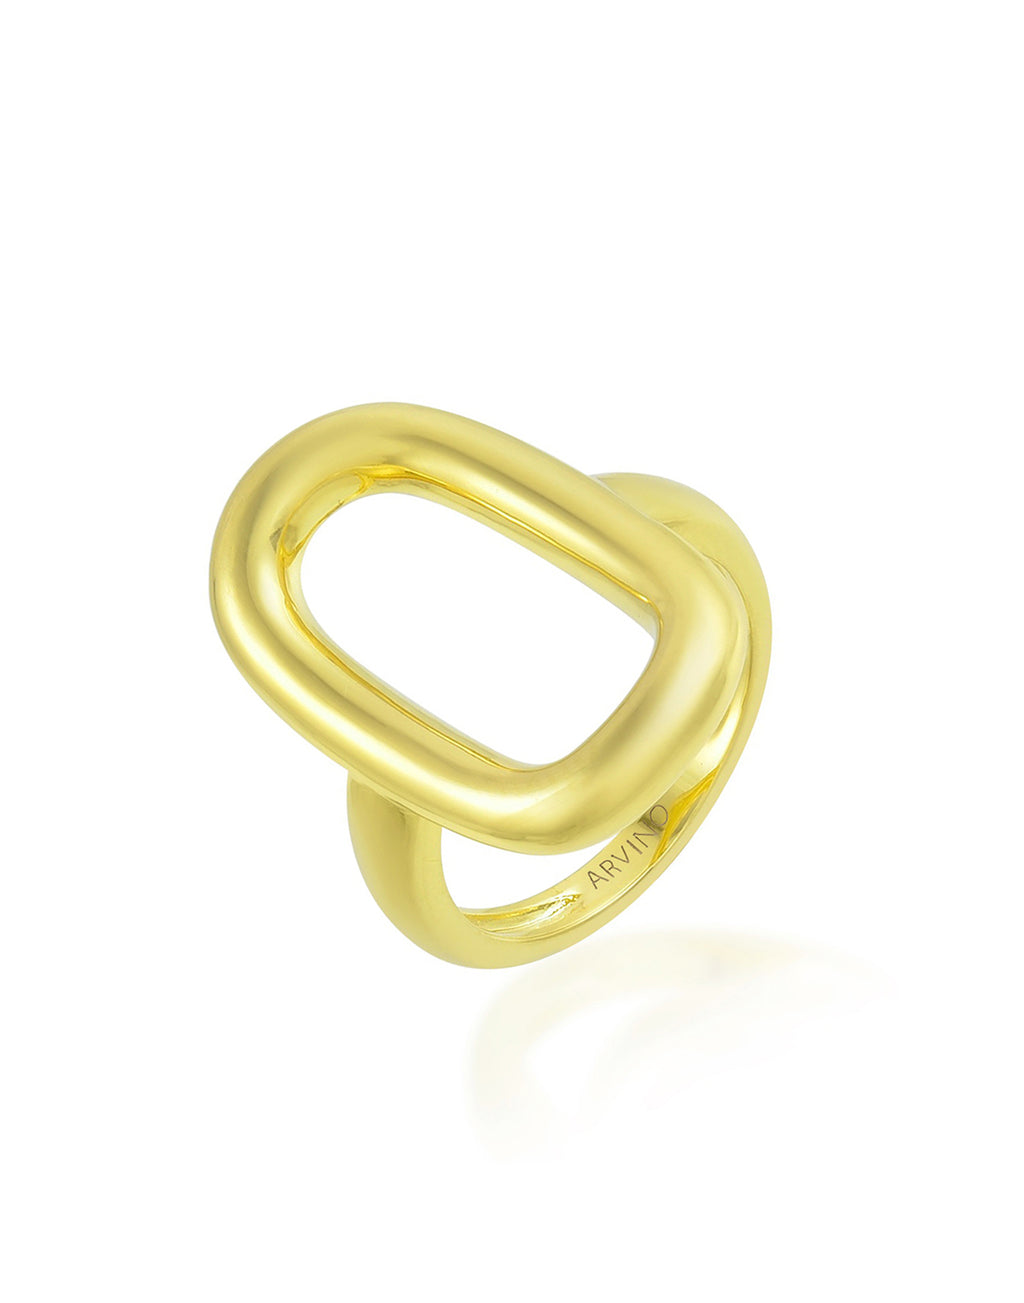 Oval Décor Ring - Statement Rings - Gold-Plated & Hypoallergenic Jewellery - Made in India - Dubai Jewellery - Dori